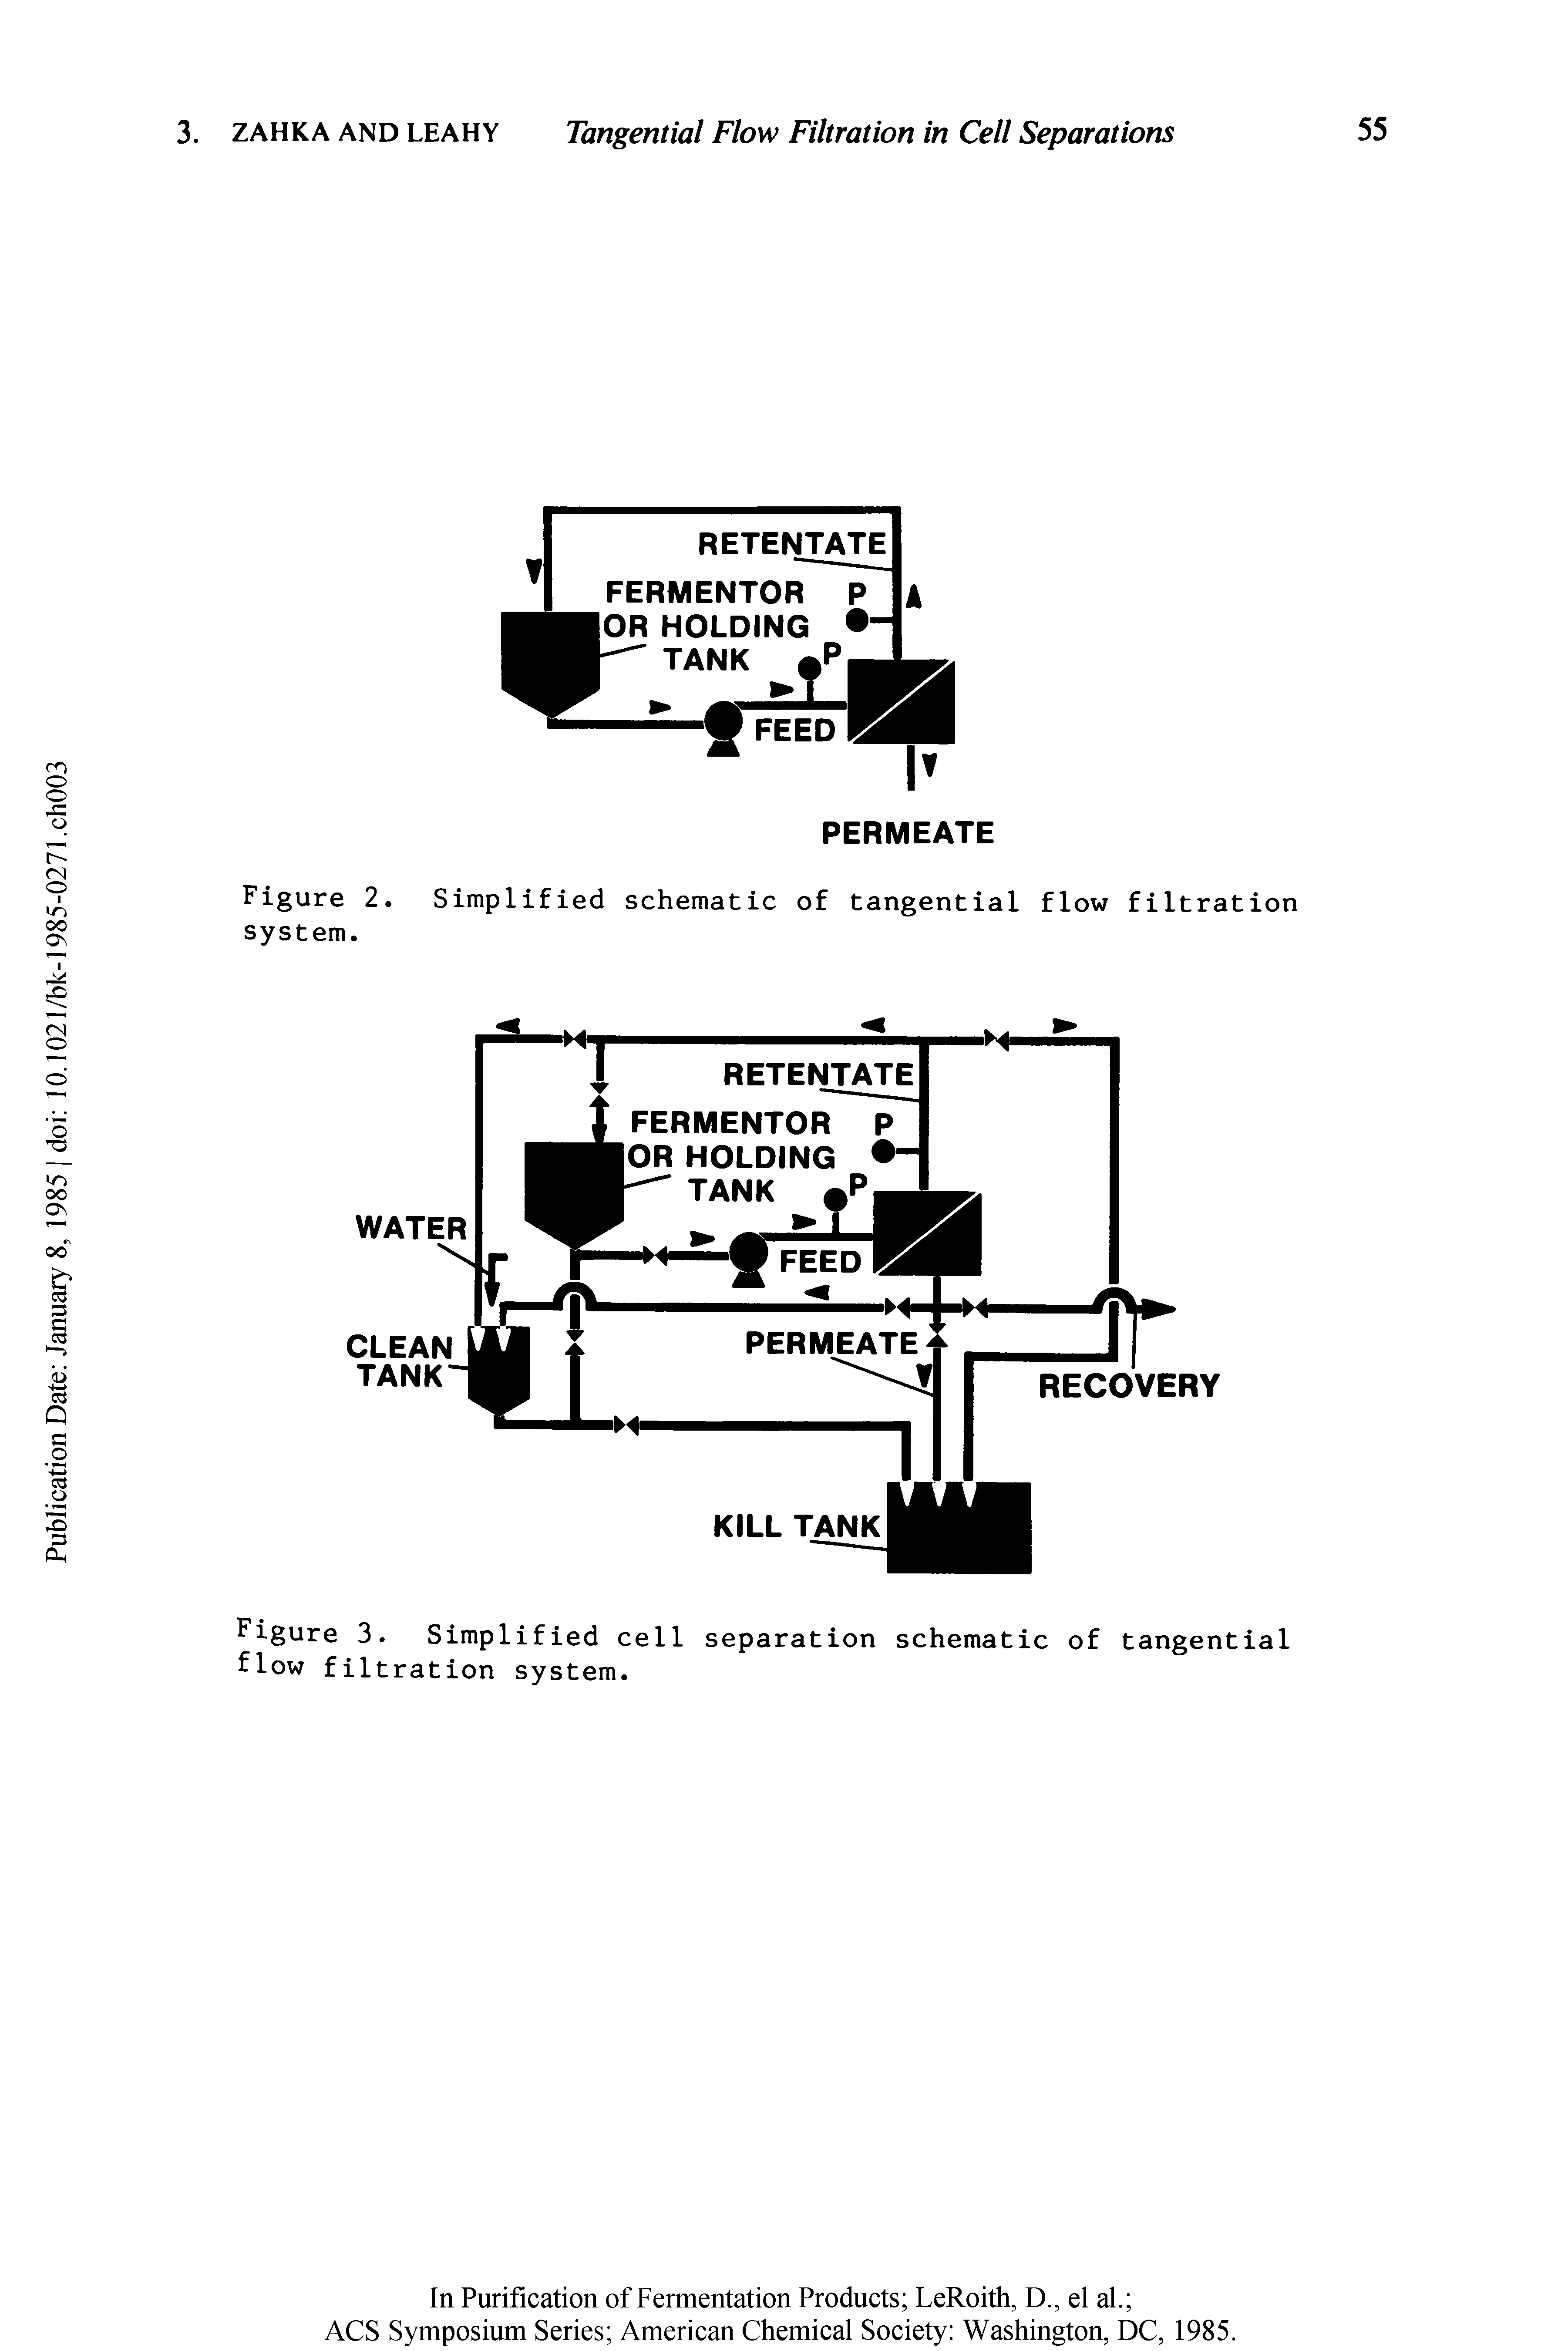 Figure 2. Simplified schematic of tangential flow filtration system.